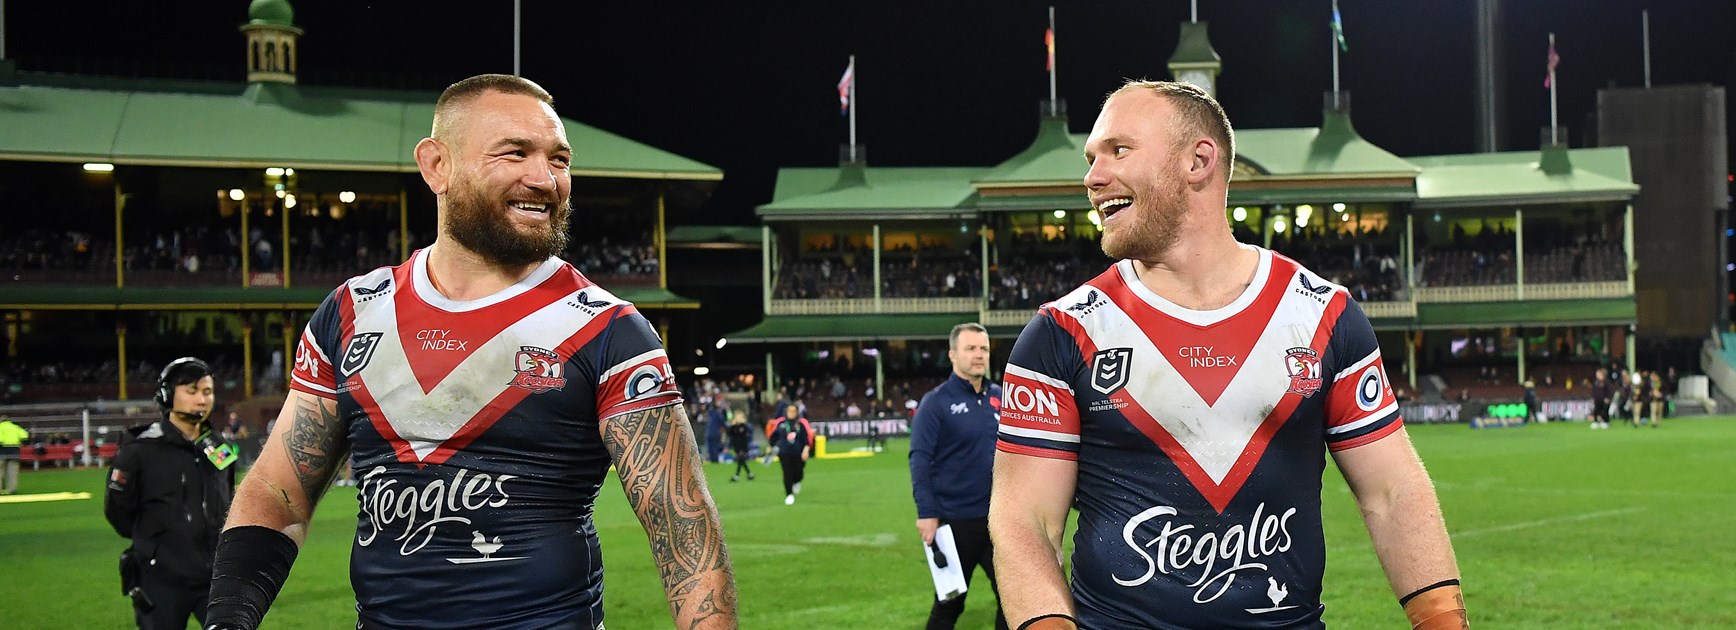 'I've never had a front-row mentor': Why Lodge is thriving at Roosters